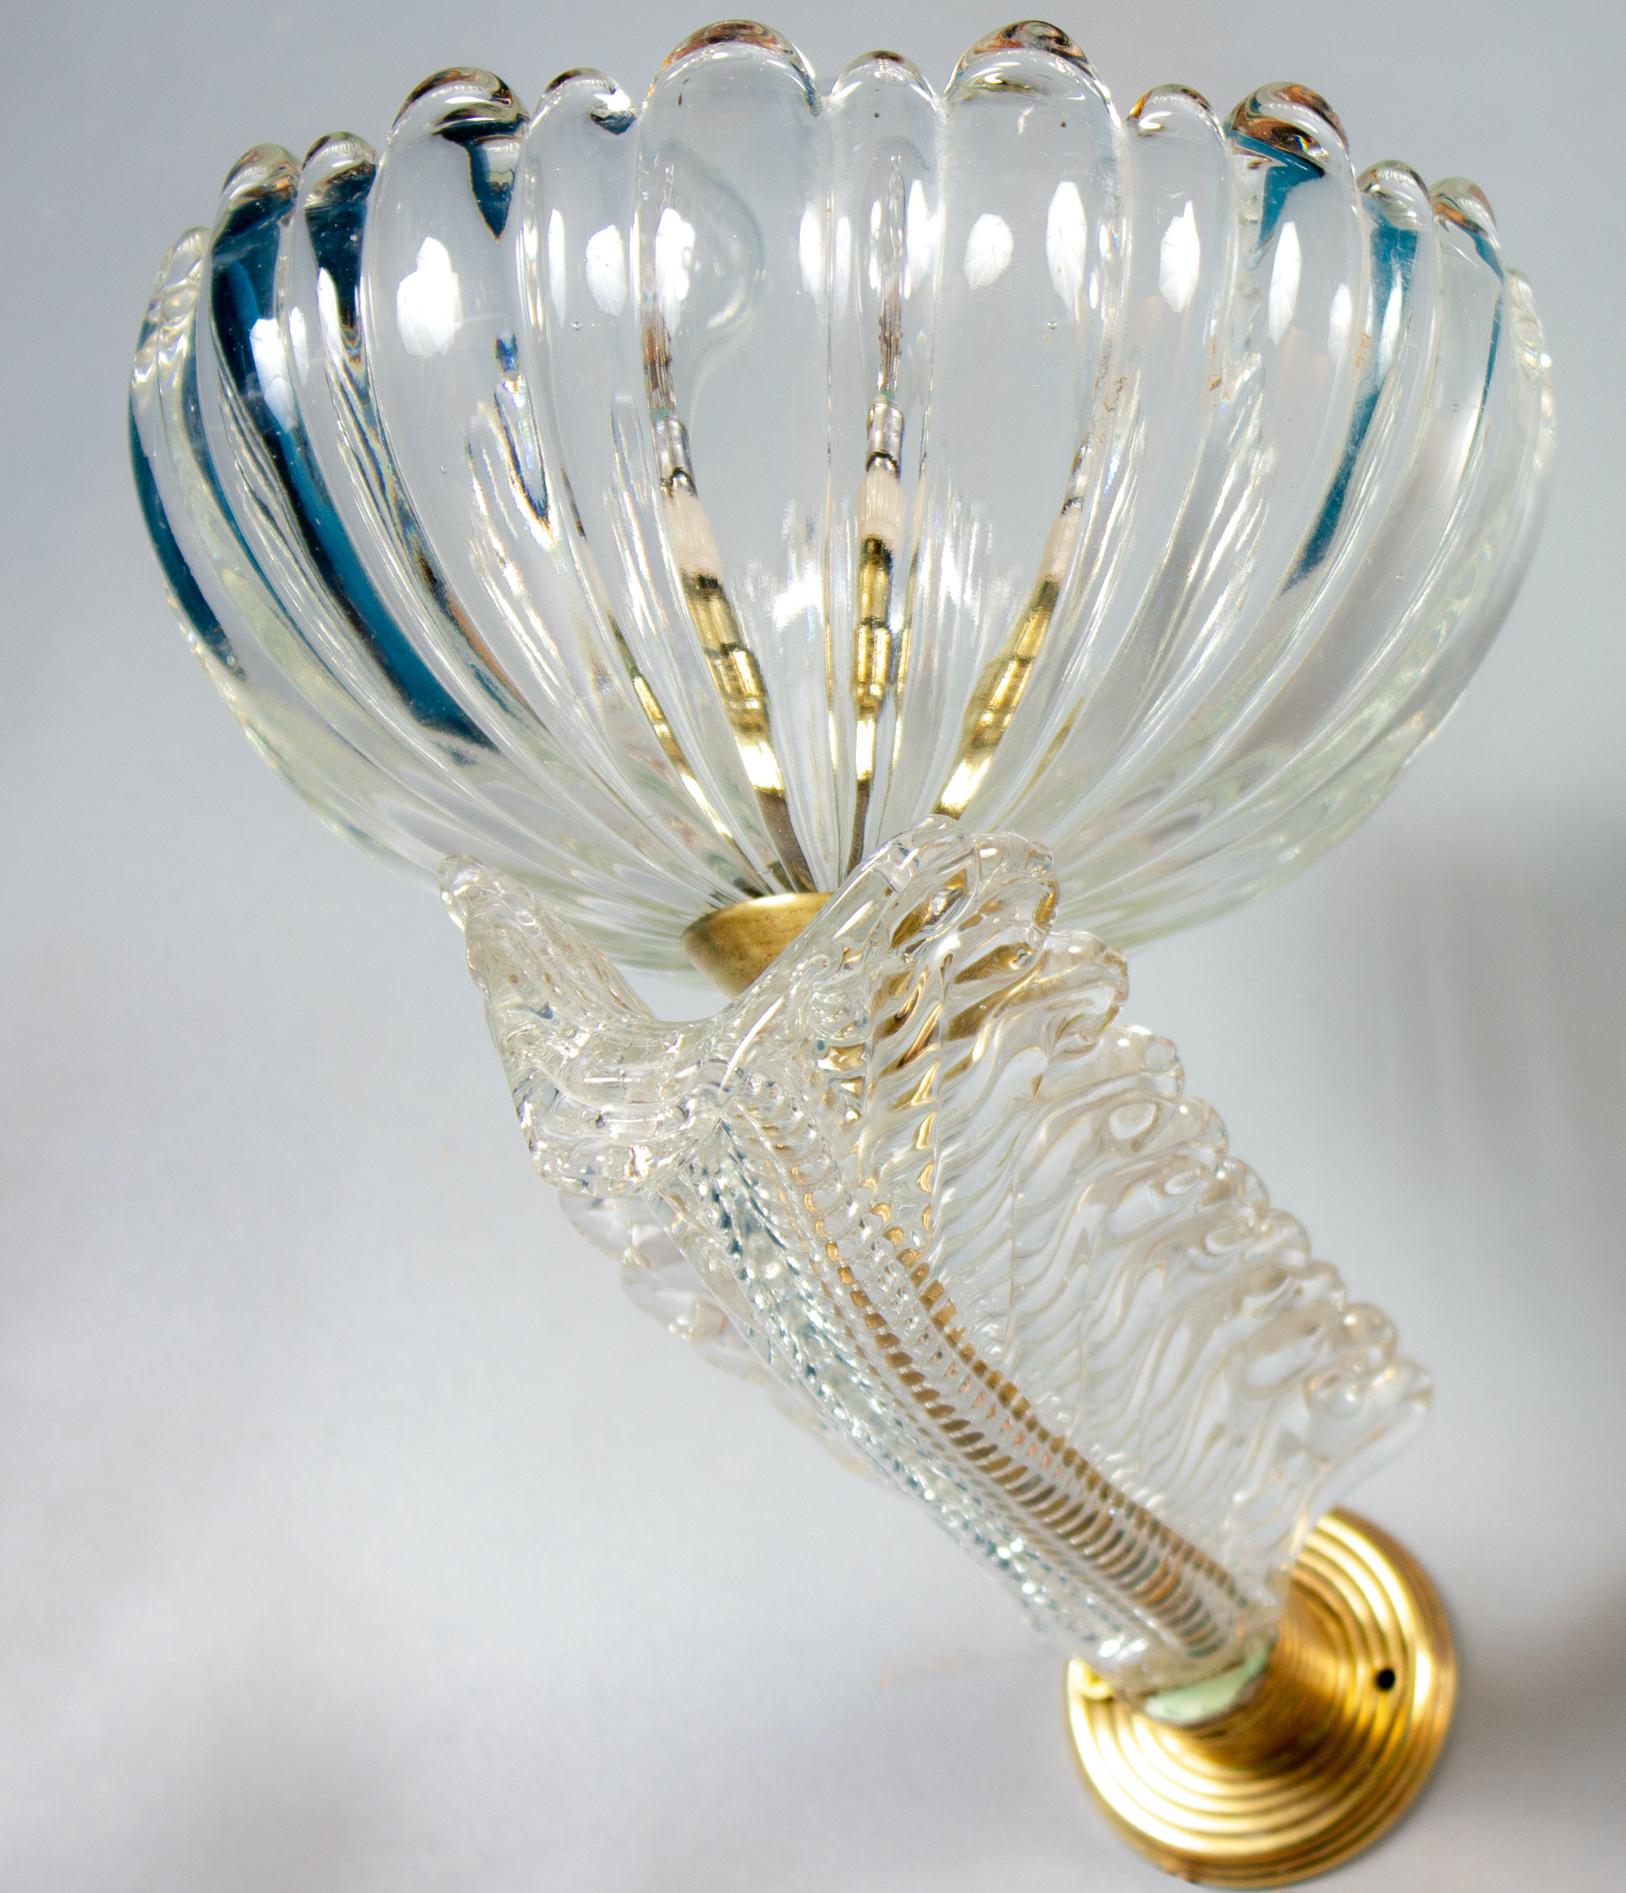 Italian Pair of Barovier Art Deco Brass Mounted Murano Glass Sconces, 1940 For Sale